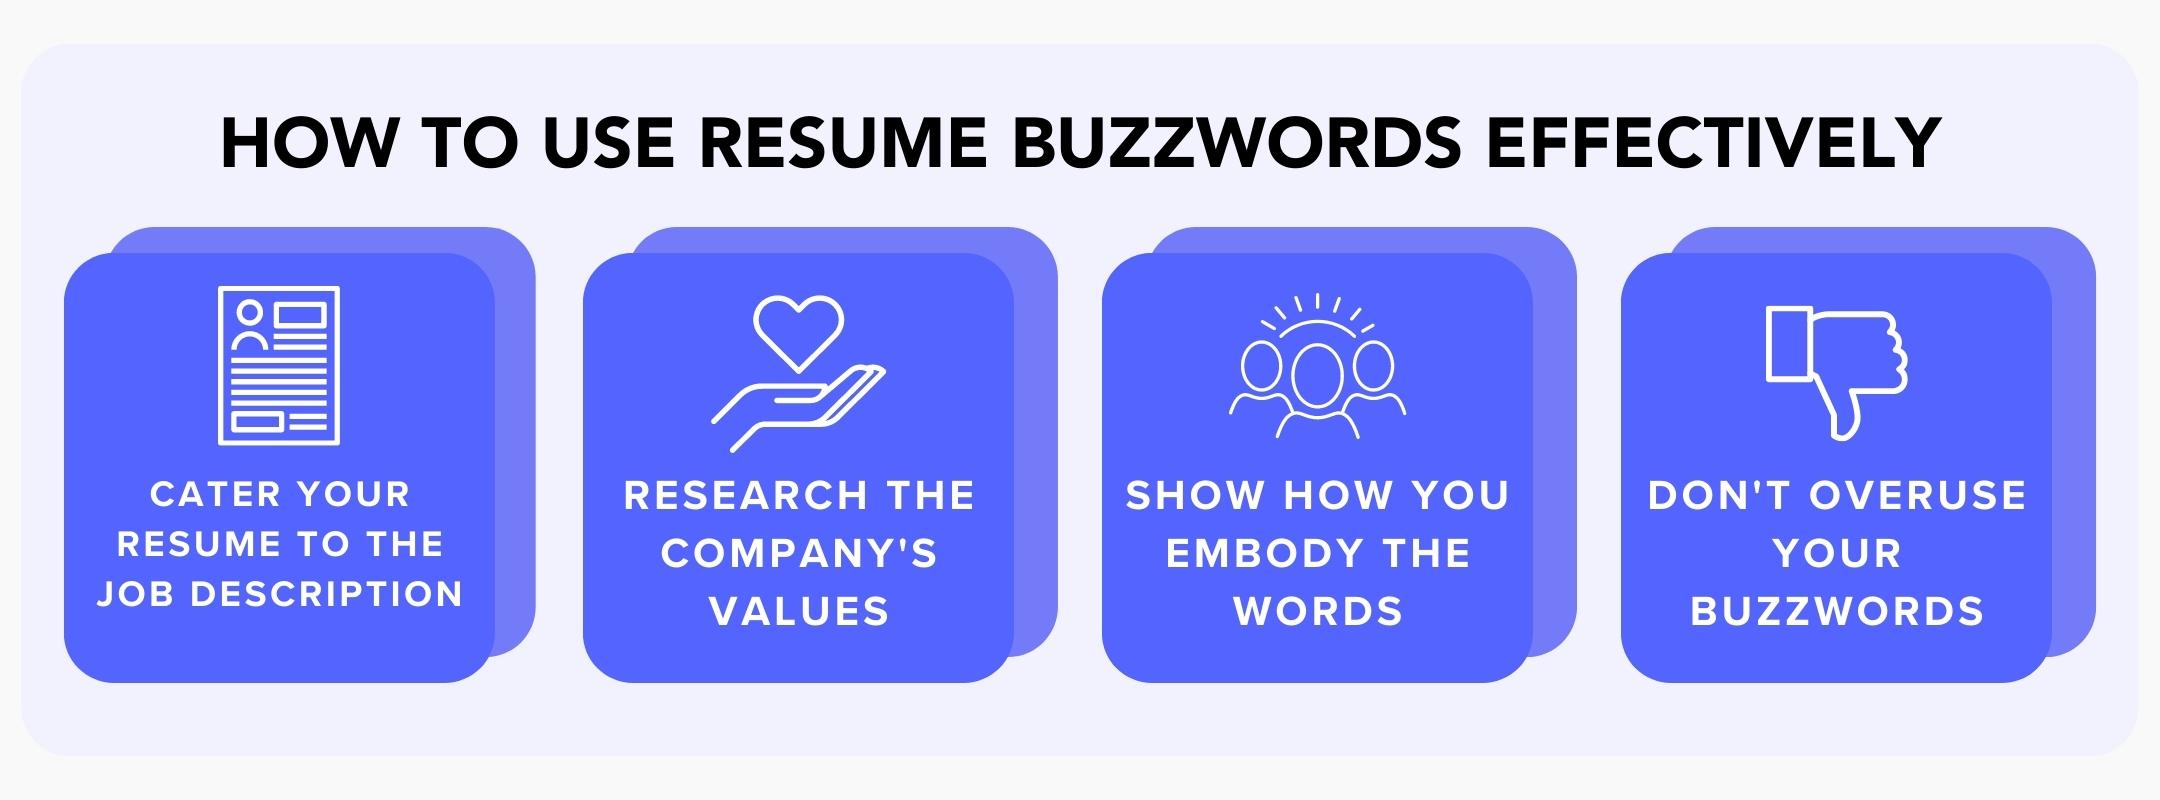 how to use resume buzzwords effectively